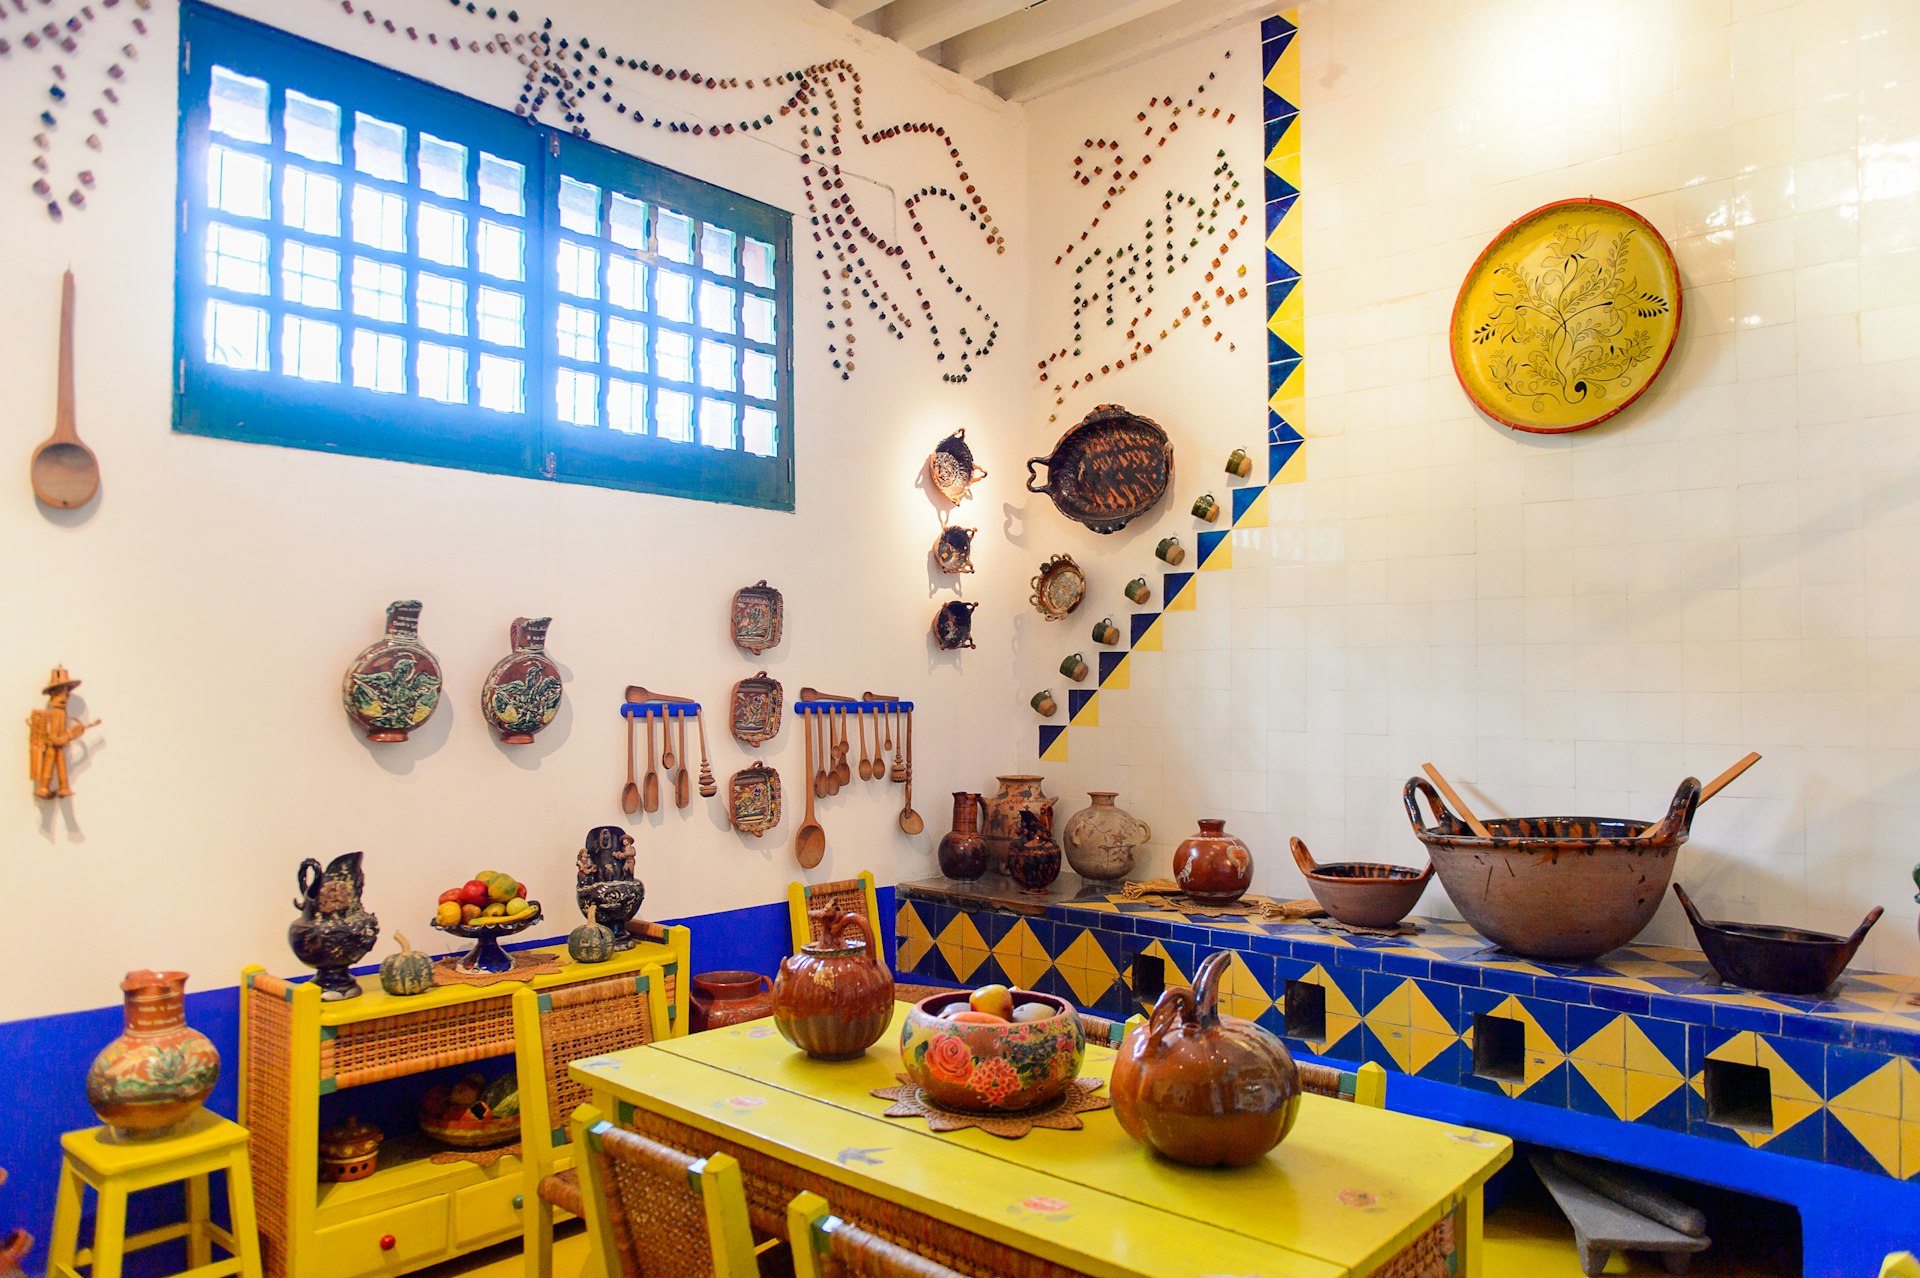 Colorful pottery and tiles in Casa Azul, Frida Kahlo's home in Mexico City